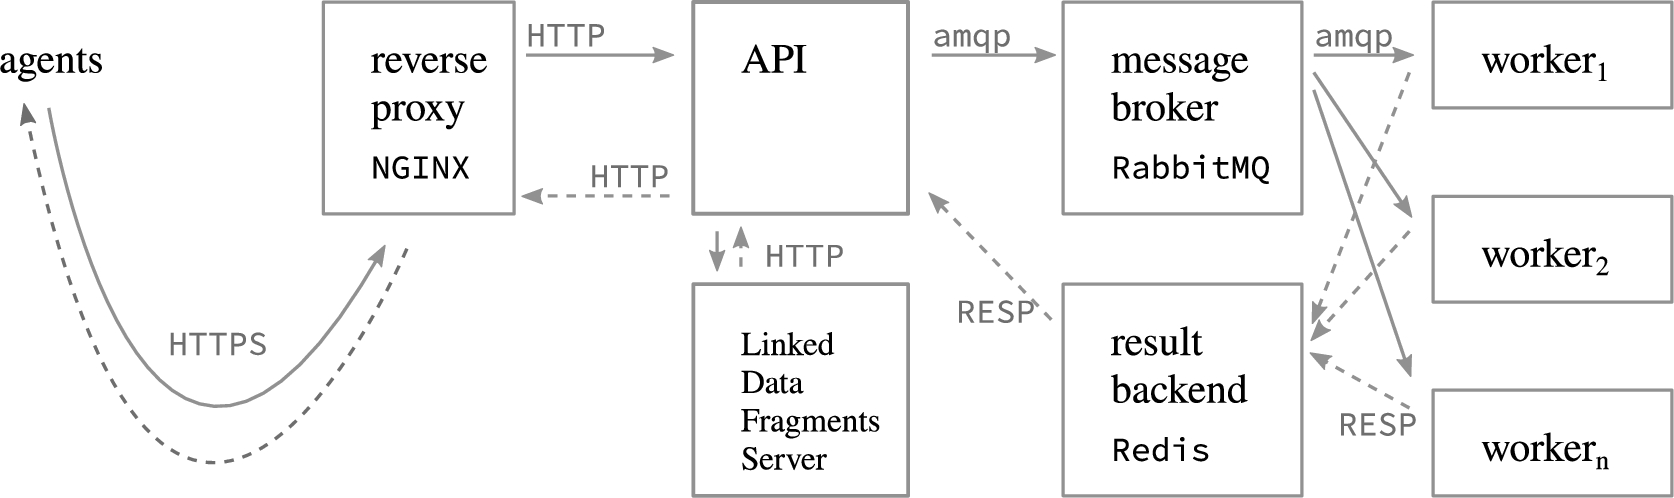 The implementation is structured in distinct API- and worker components which exchange data via queues; a reverse proxy provides a HTTPS connection to users. An instance of https://github.com/LinkedDataFragments/Server.js enables querying (proxied through the API).